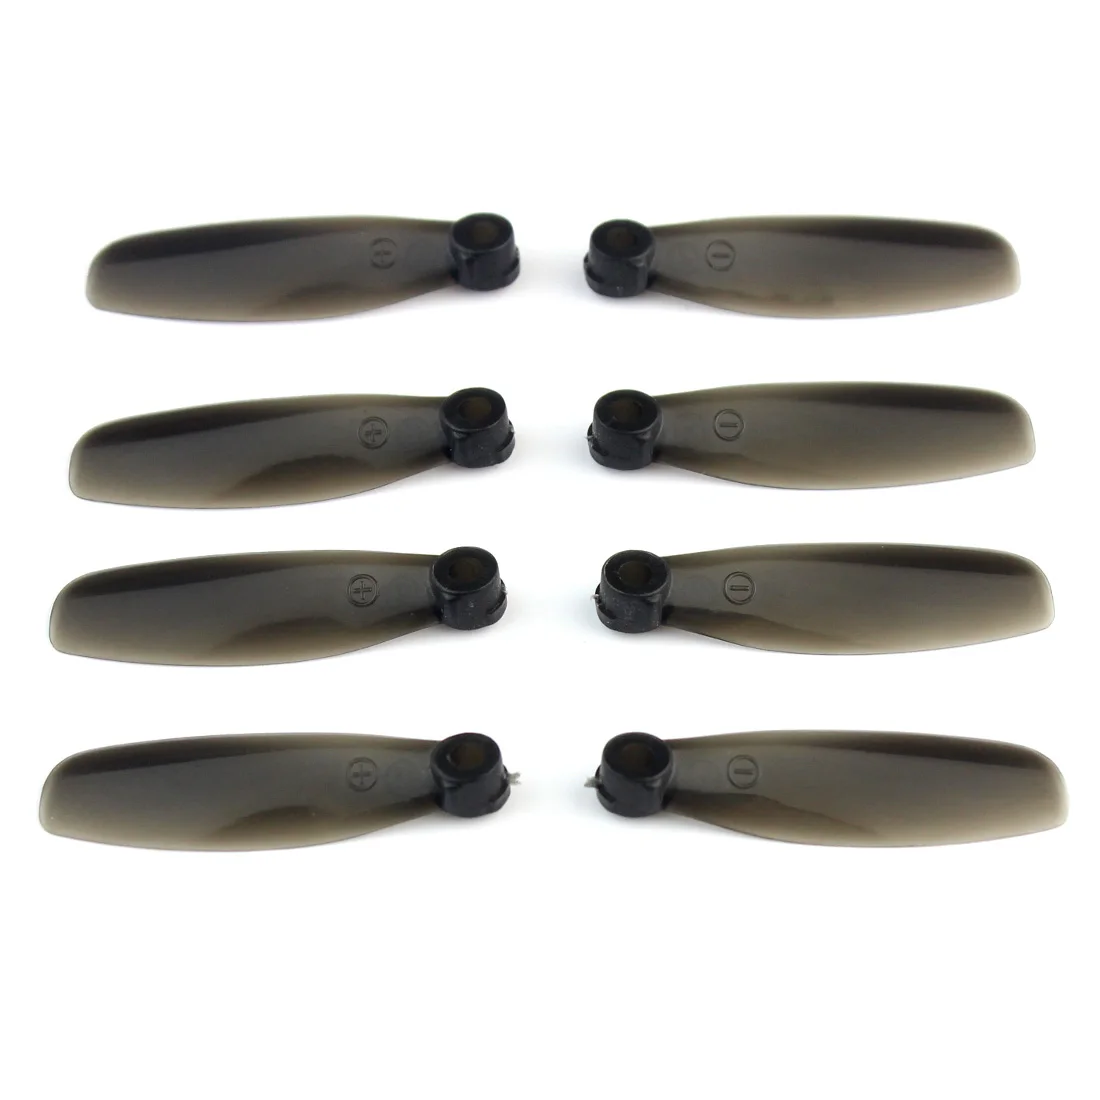 S6 for FPV Props Drone Propellers 8pcs Mini WINGSLAND Drone